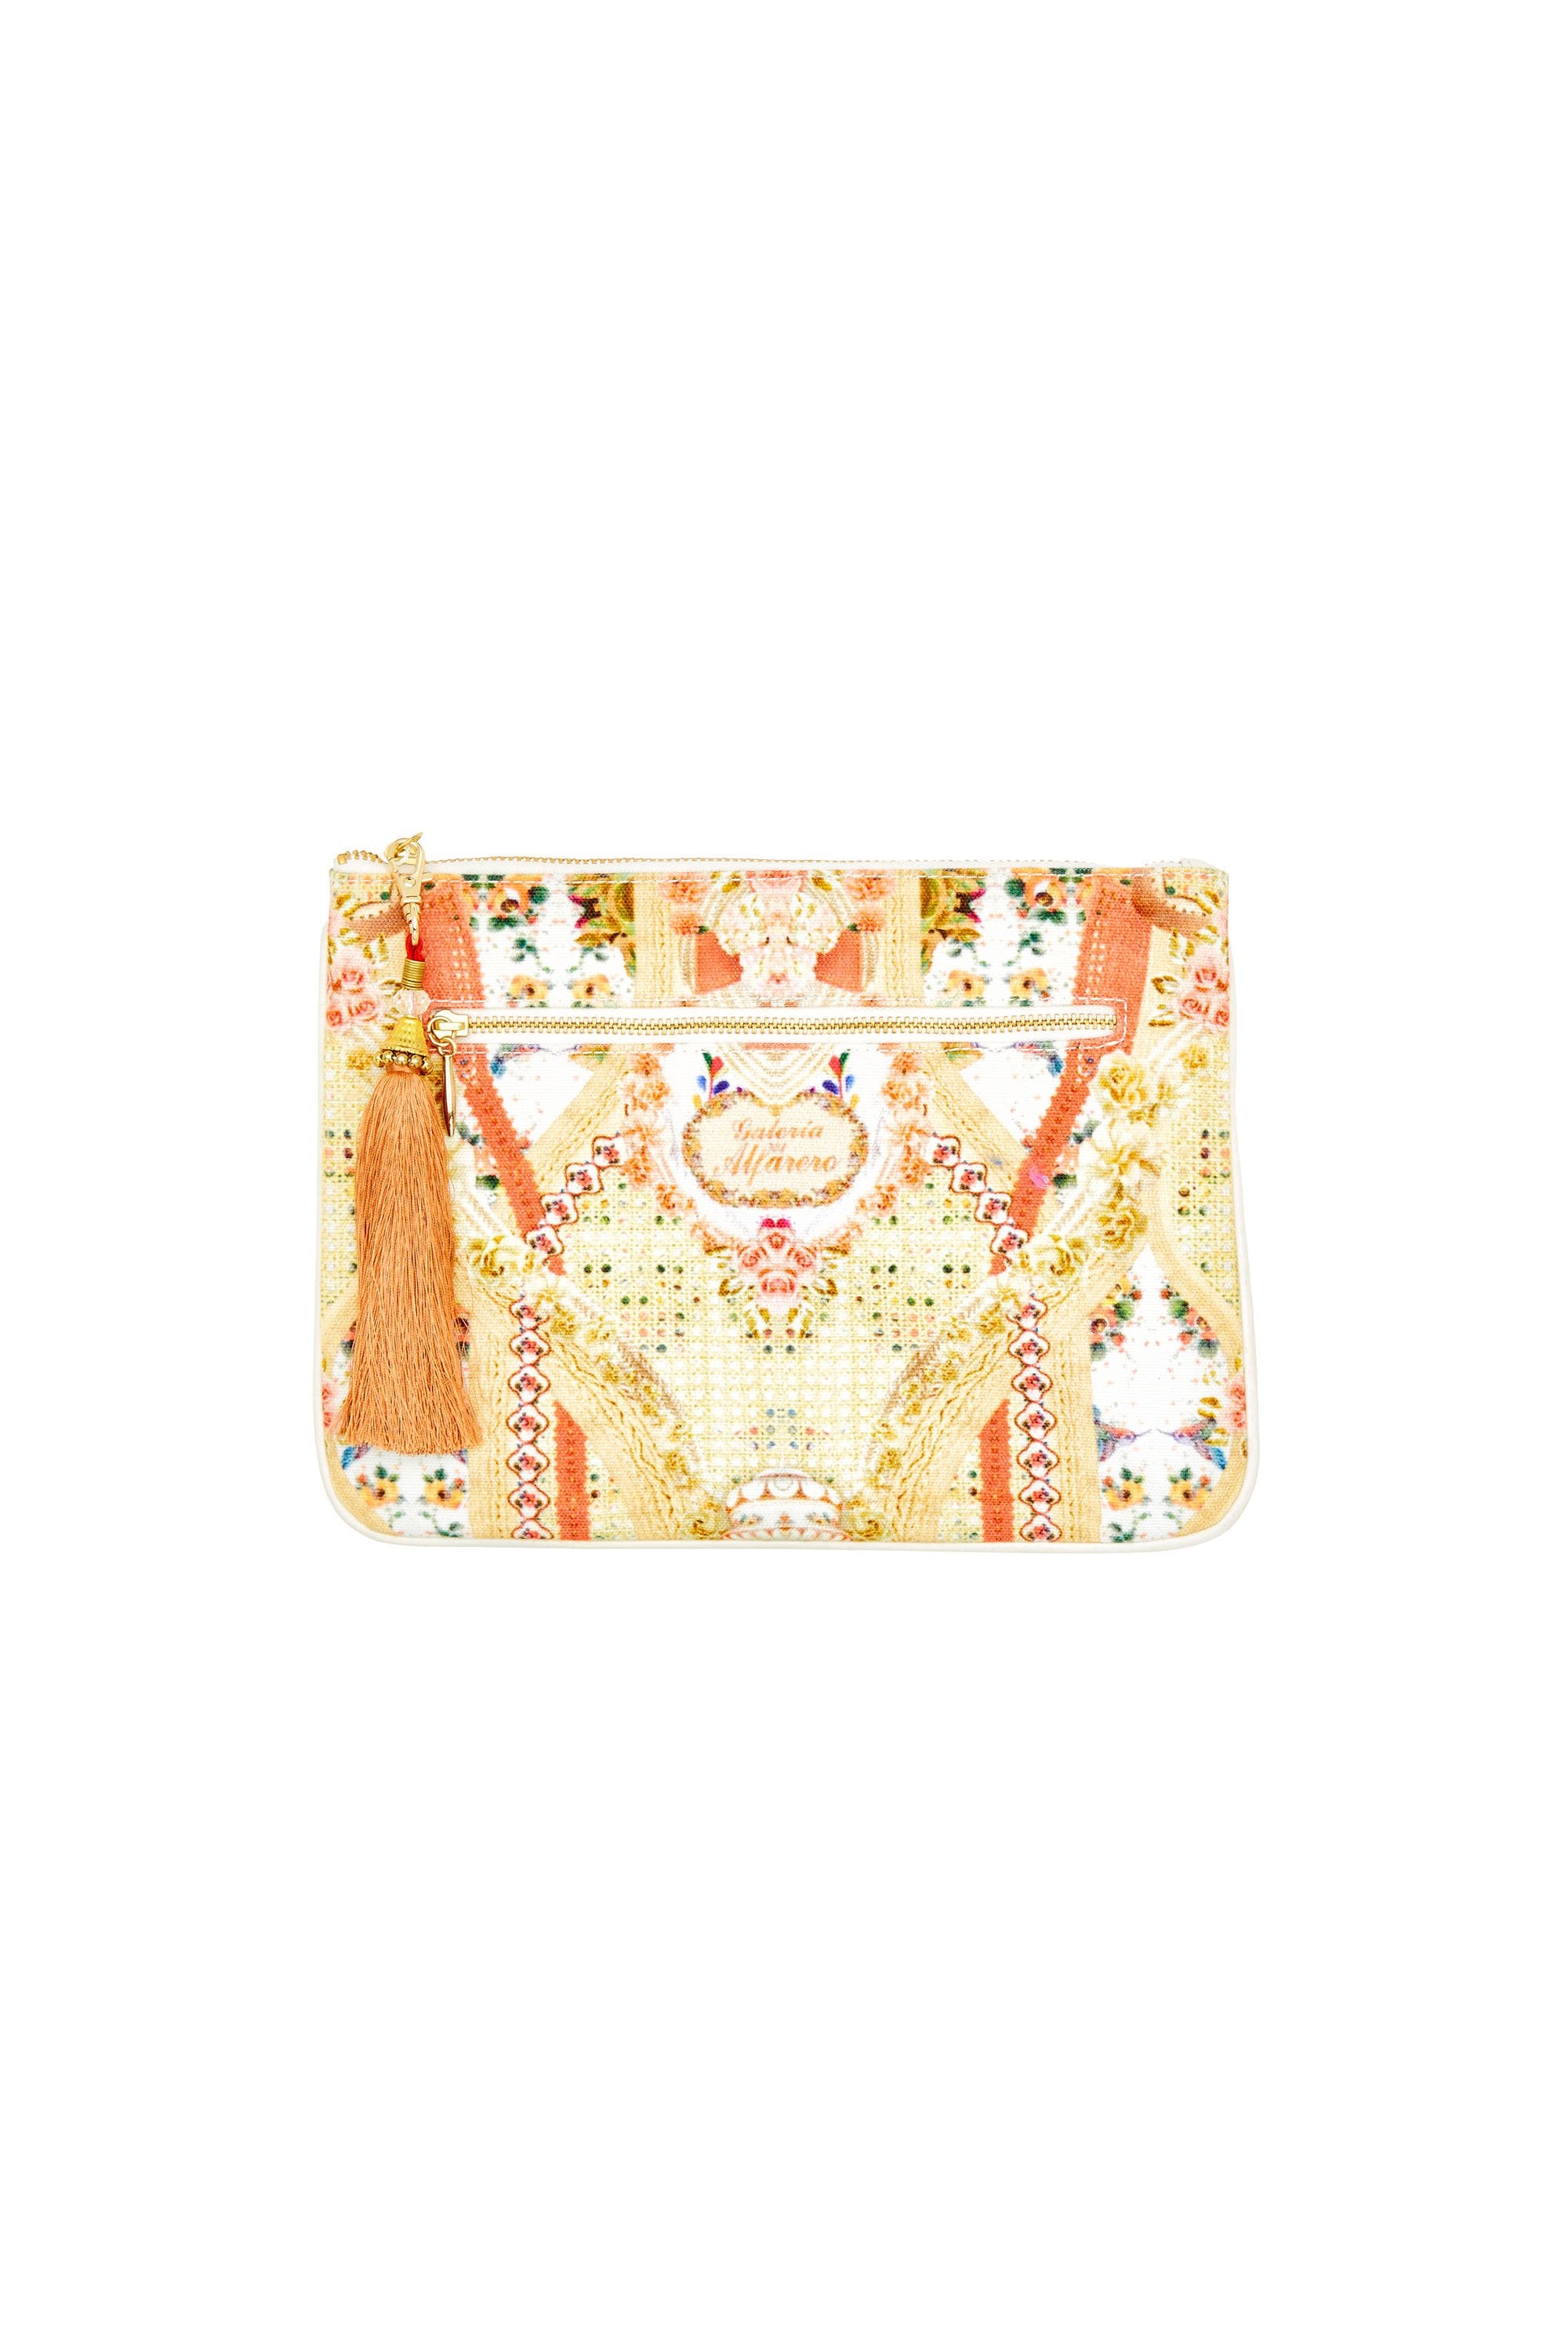 MY SUMMER LOVE SMALL CANVAS CLUTCH